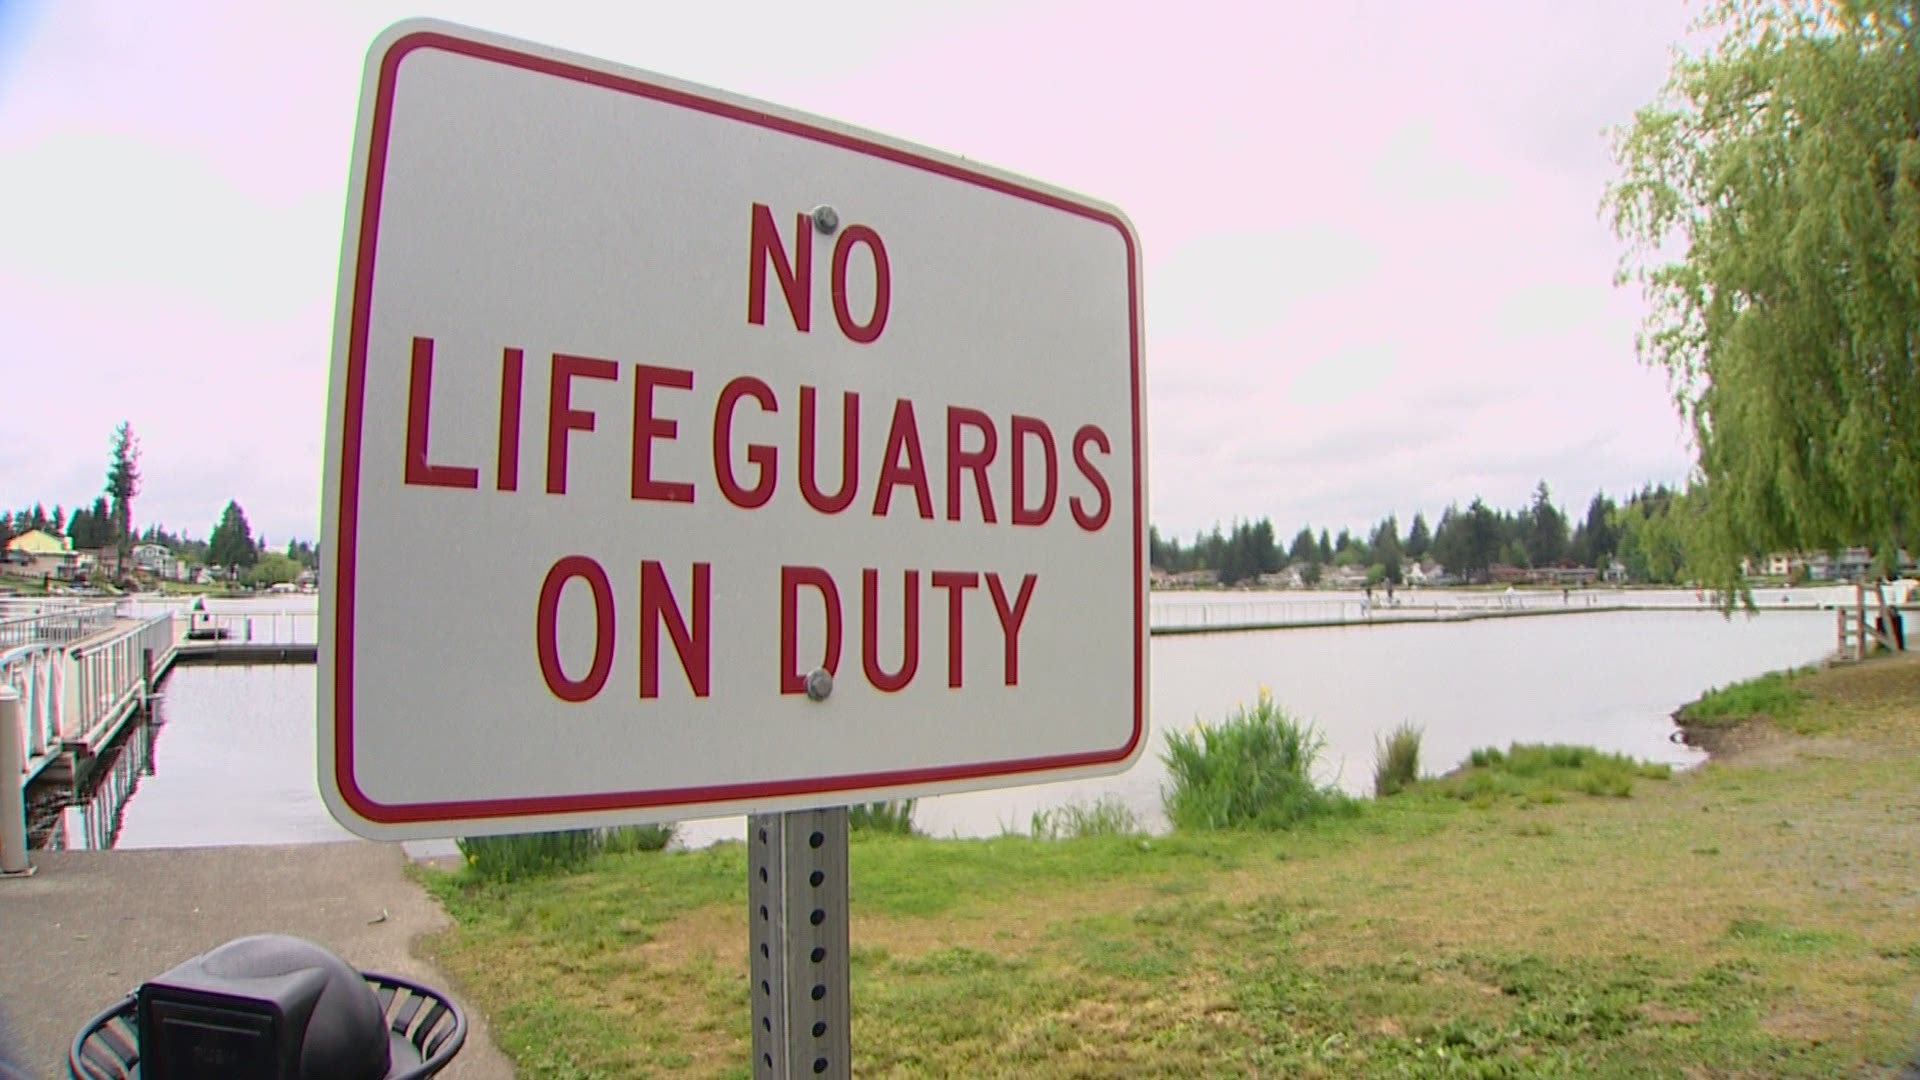 The City of Kent says they may have to cancel their lifeguard program after only a few people applied for as many as 20 open positions.